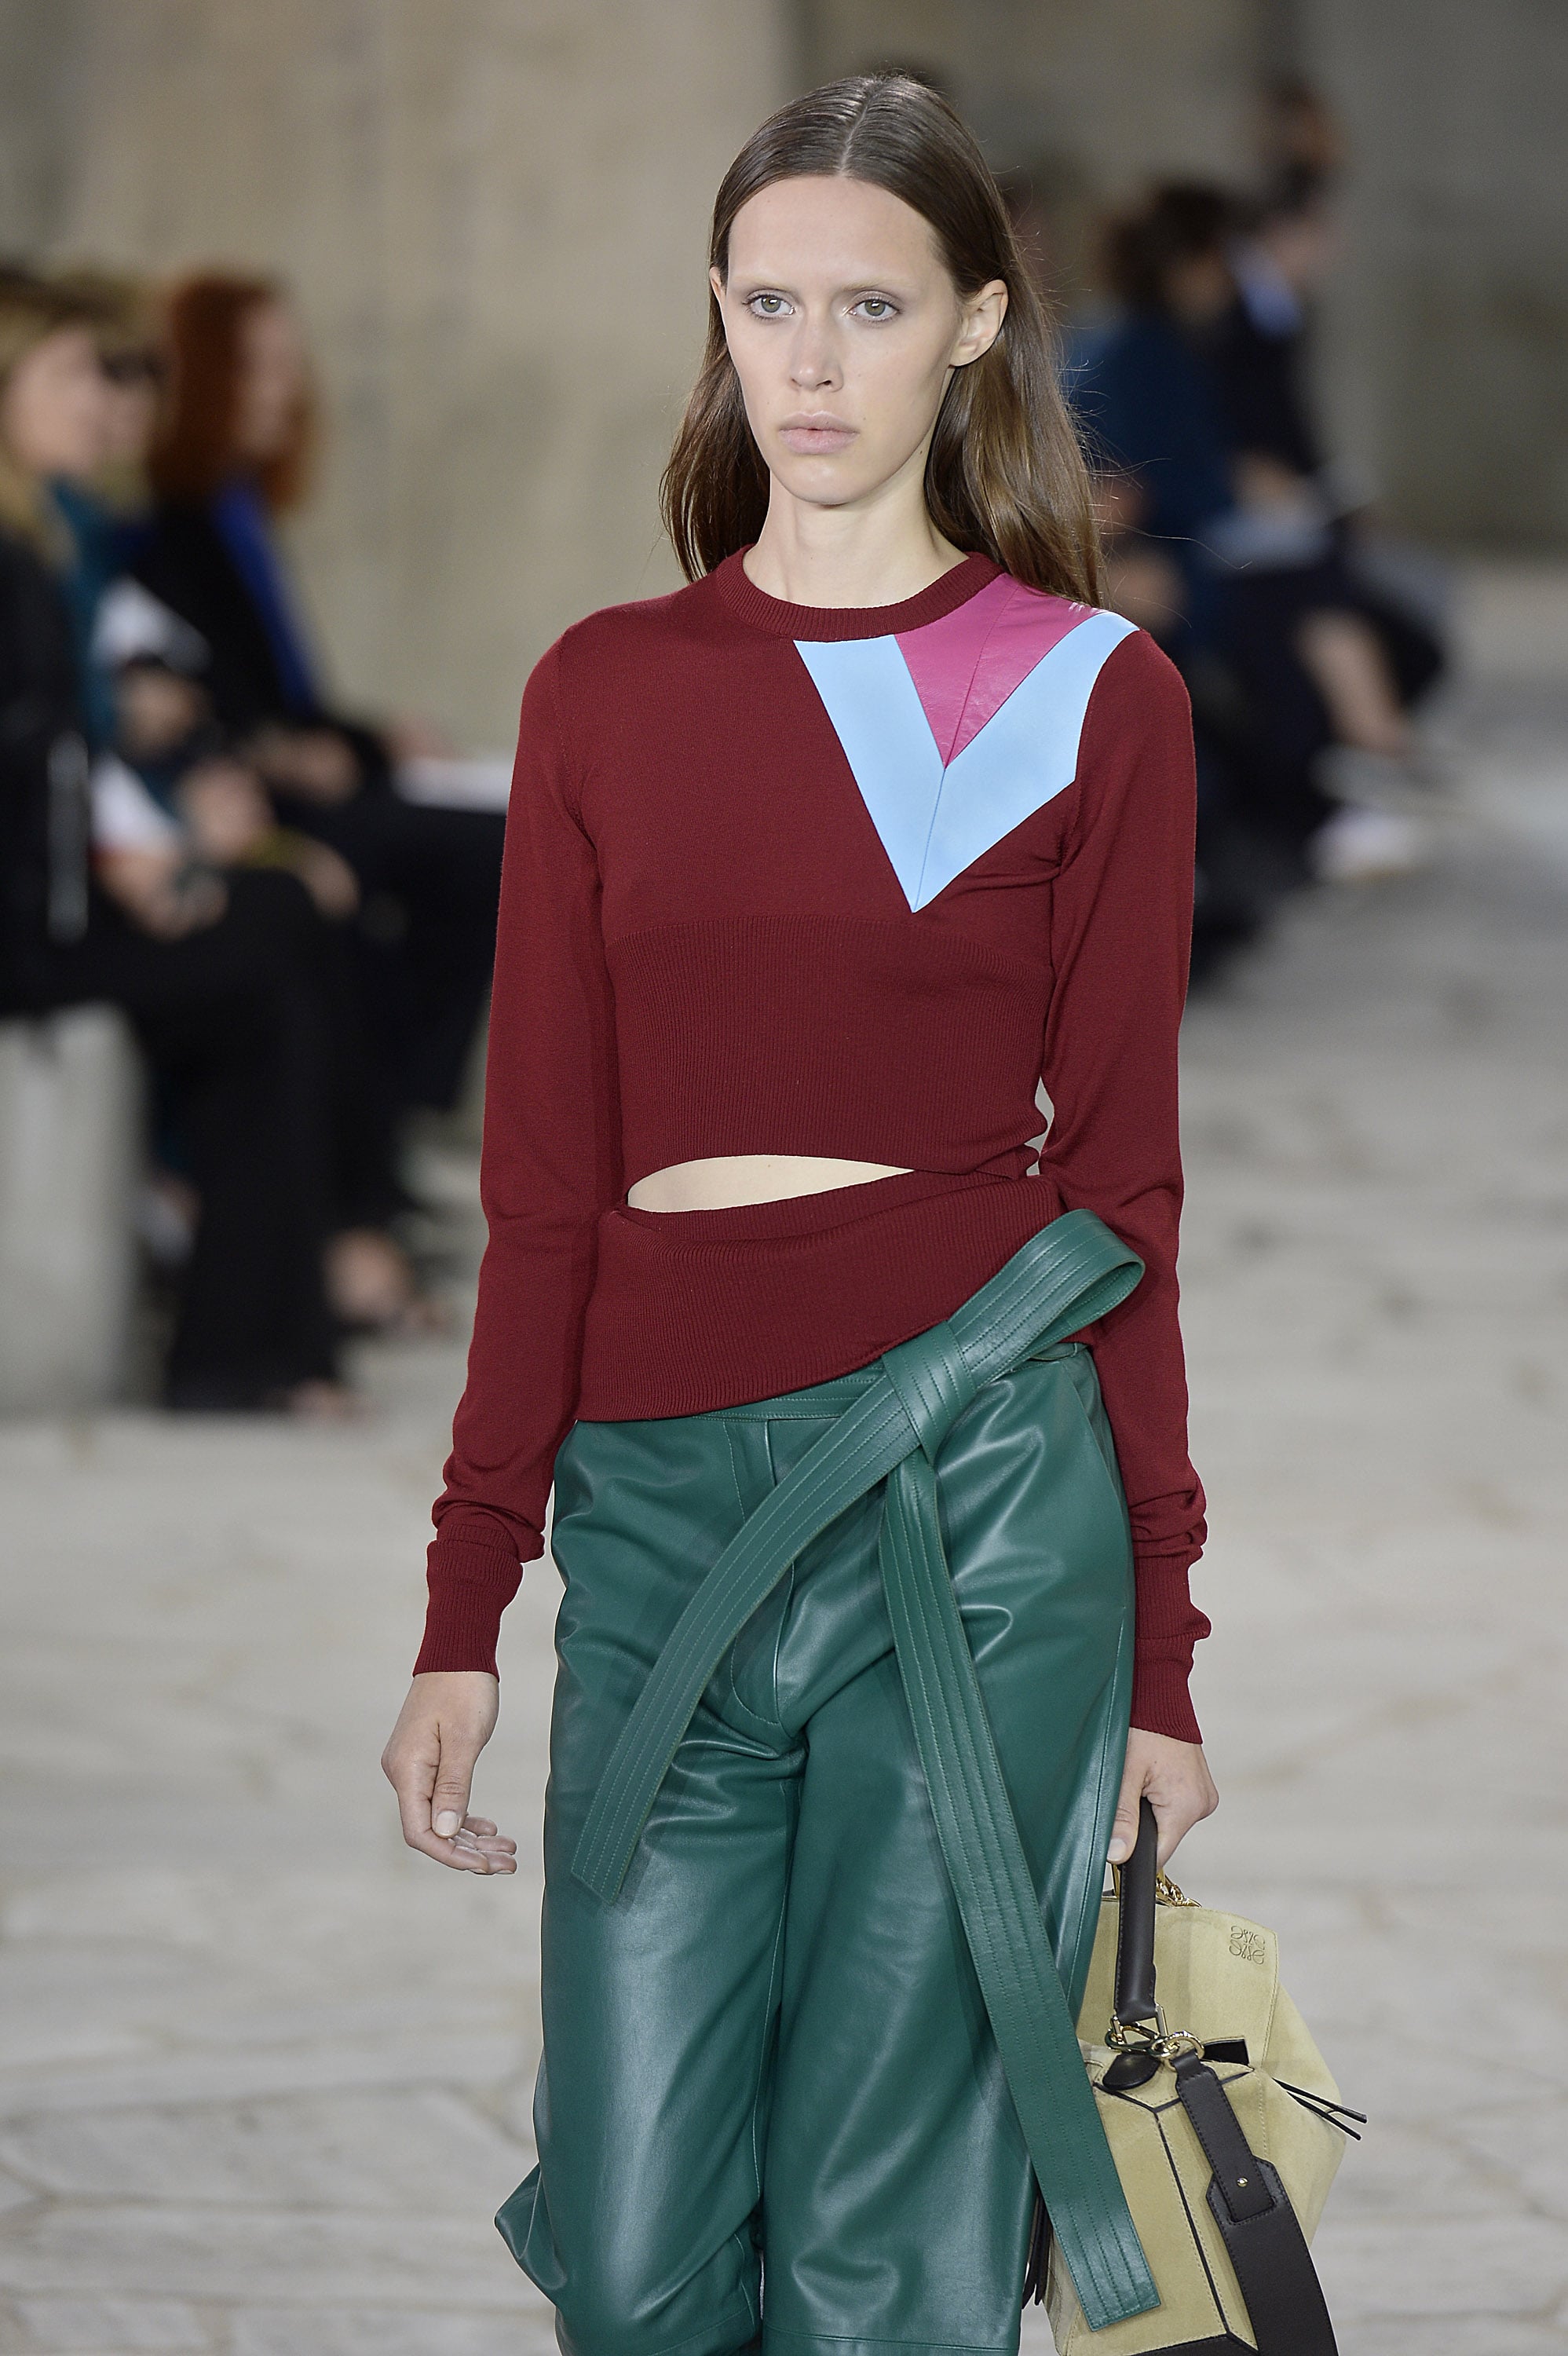 The Obi Belt Trend Is Still Ruling The Fashion Scene: See 24